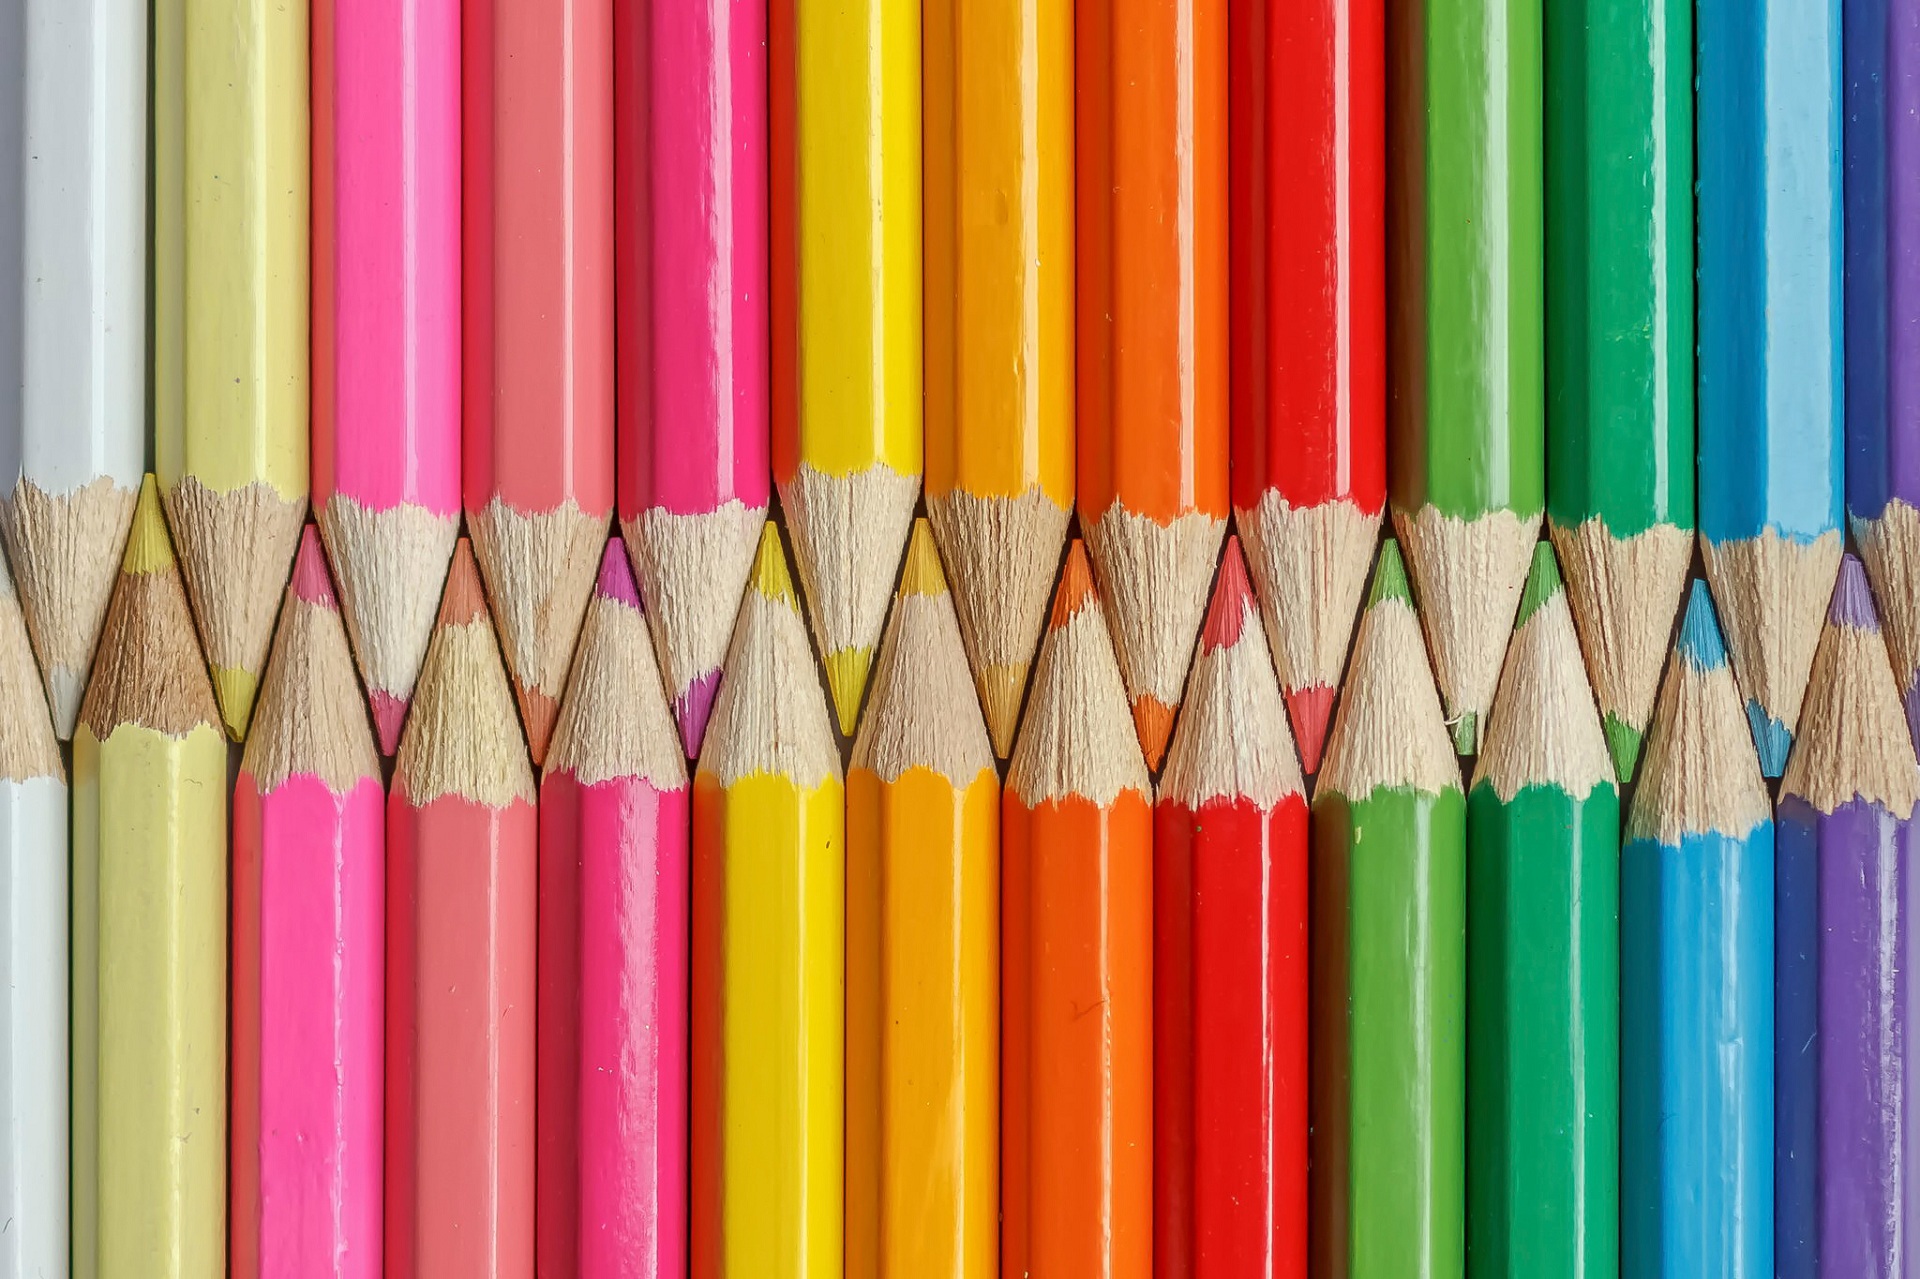 pencil wallpaper,pencil,office supplies,writing implement,colorfulness,stationery